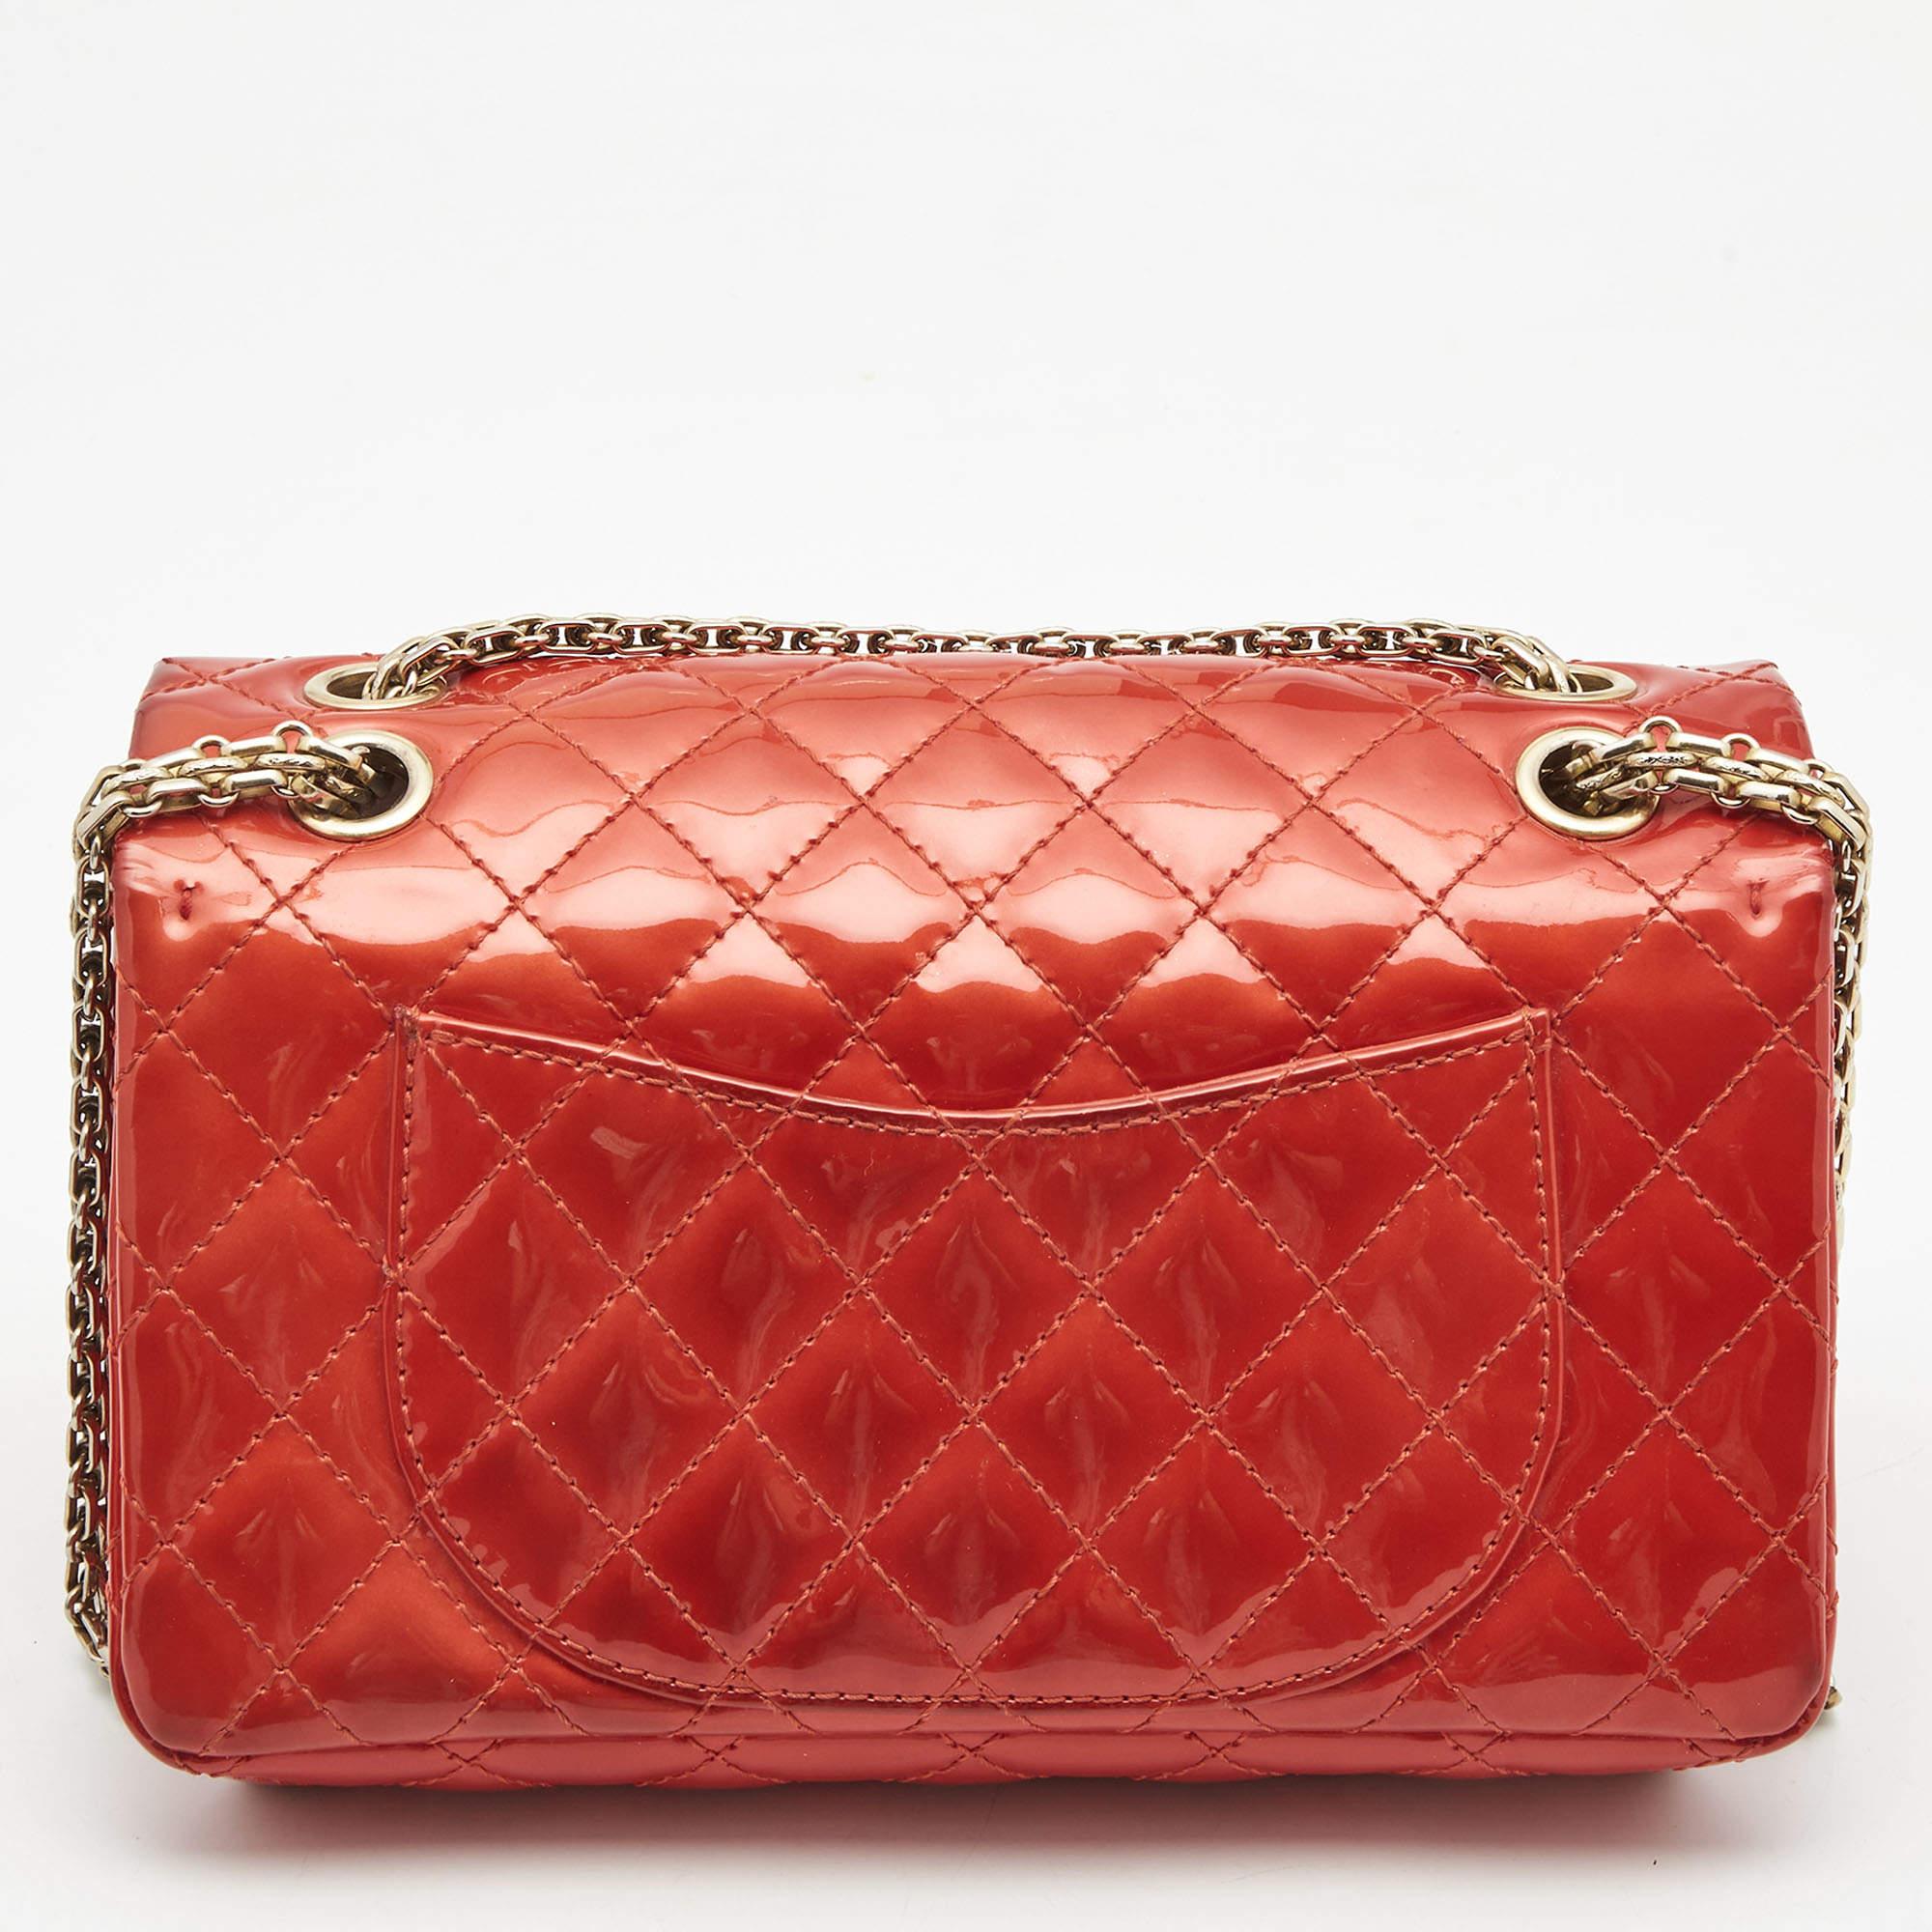 Chanel Red Patent Leather Reissue Double Compartment Flap Bag For Sale 12